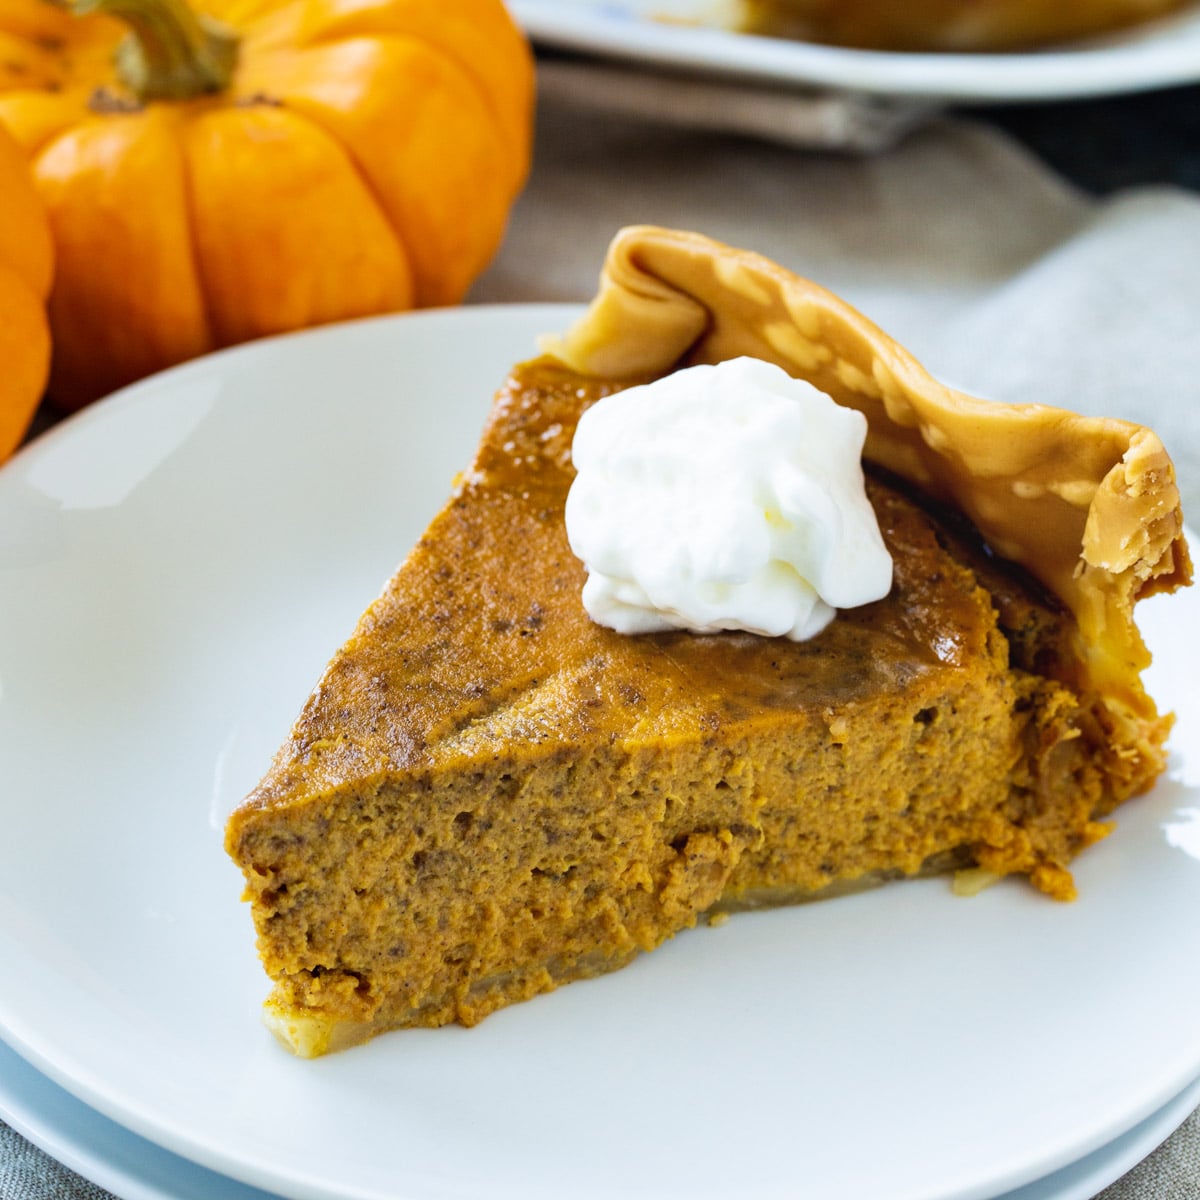 Slice of Crock Pot Pumpkin Pie topped with whipped cream.